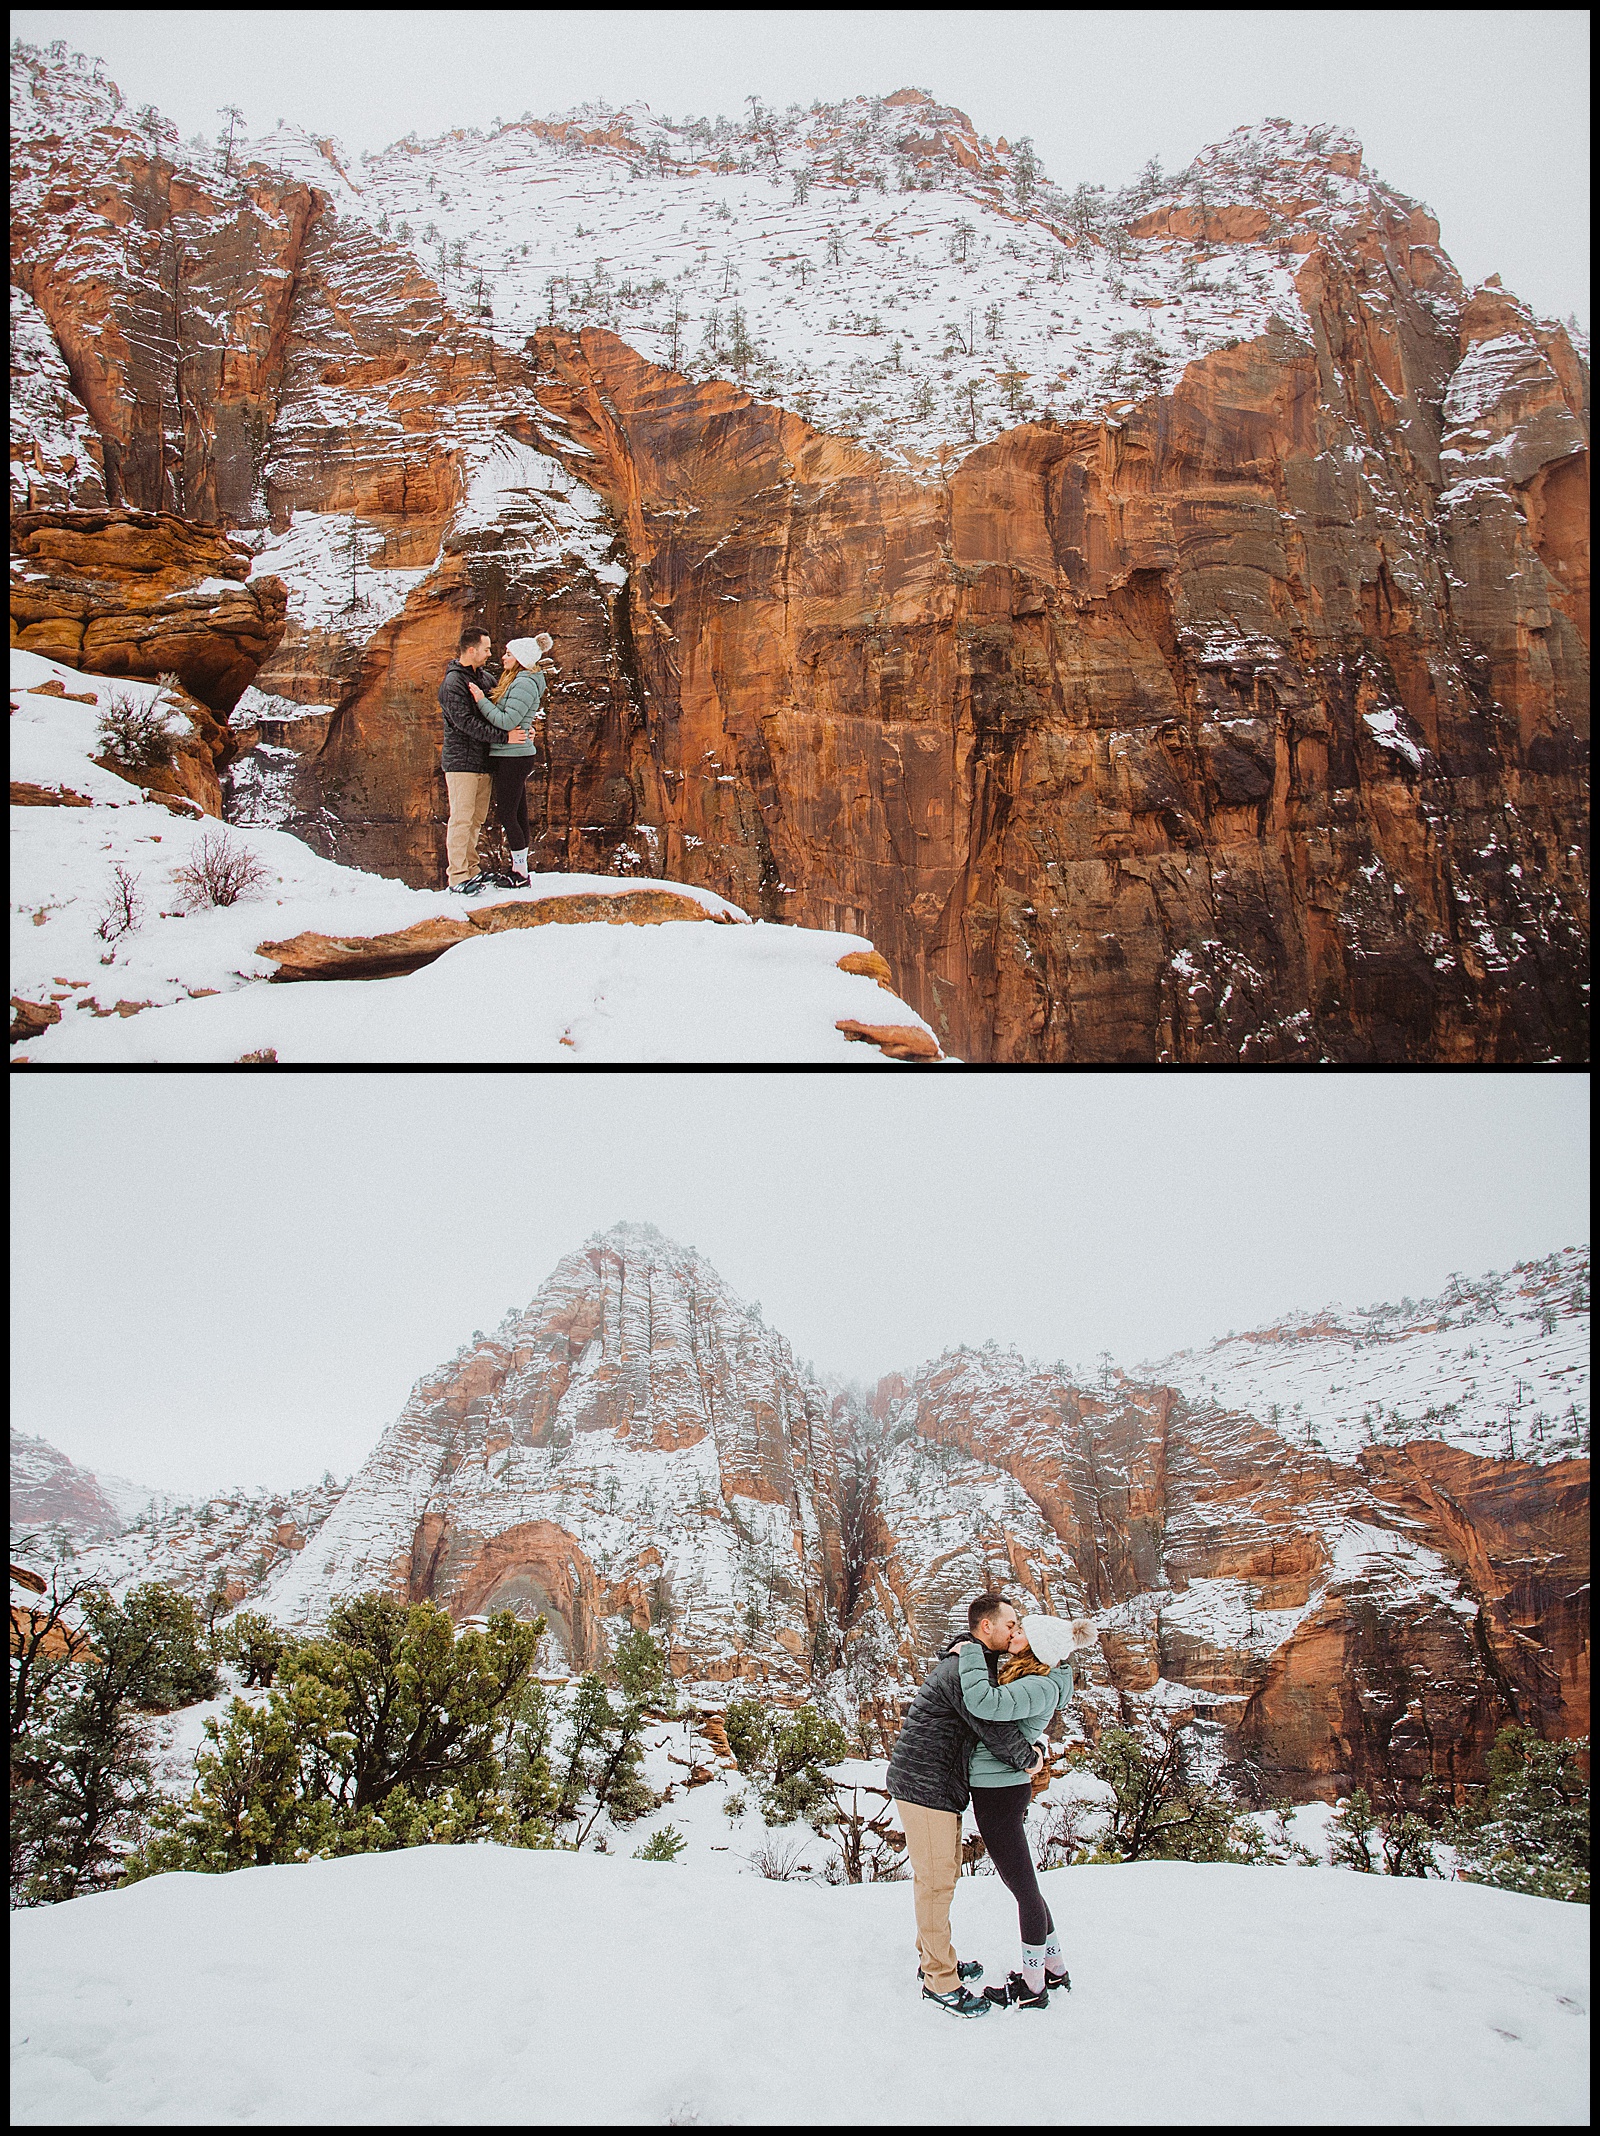 zion national park, winter in zion, how to propose, zion guide, zion narrows, zion elopement, 